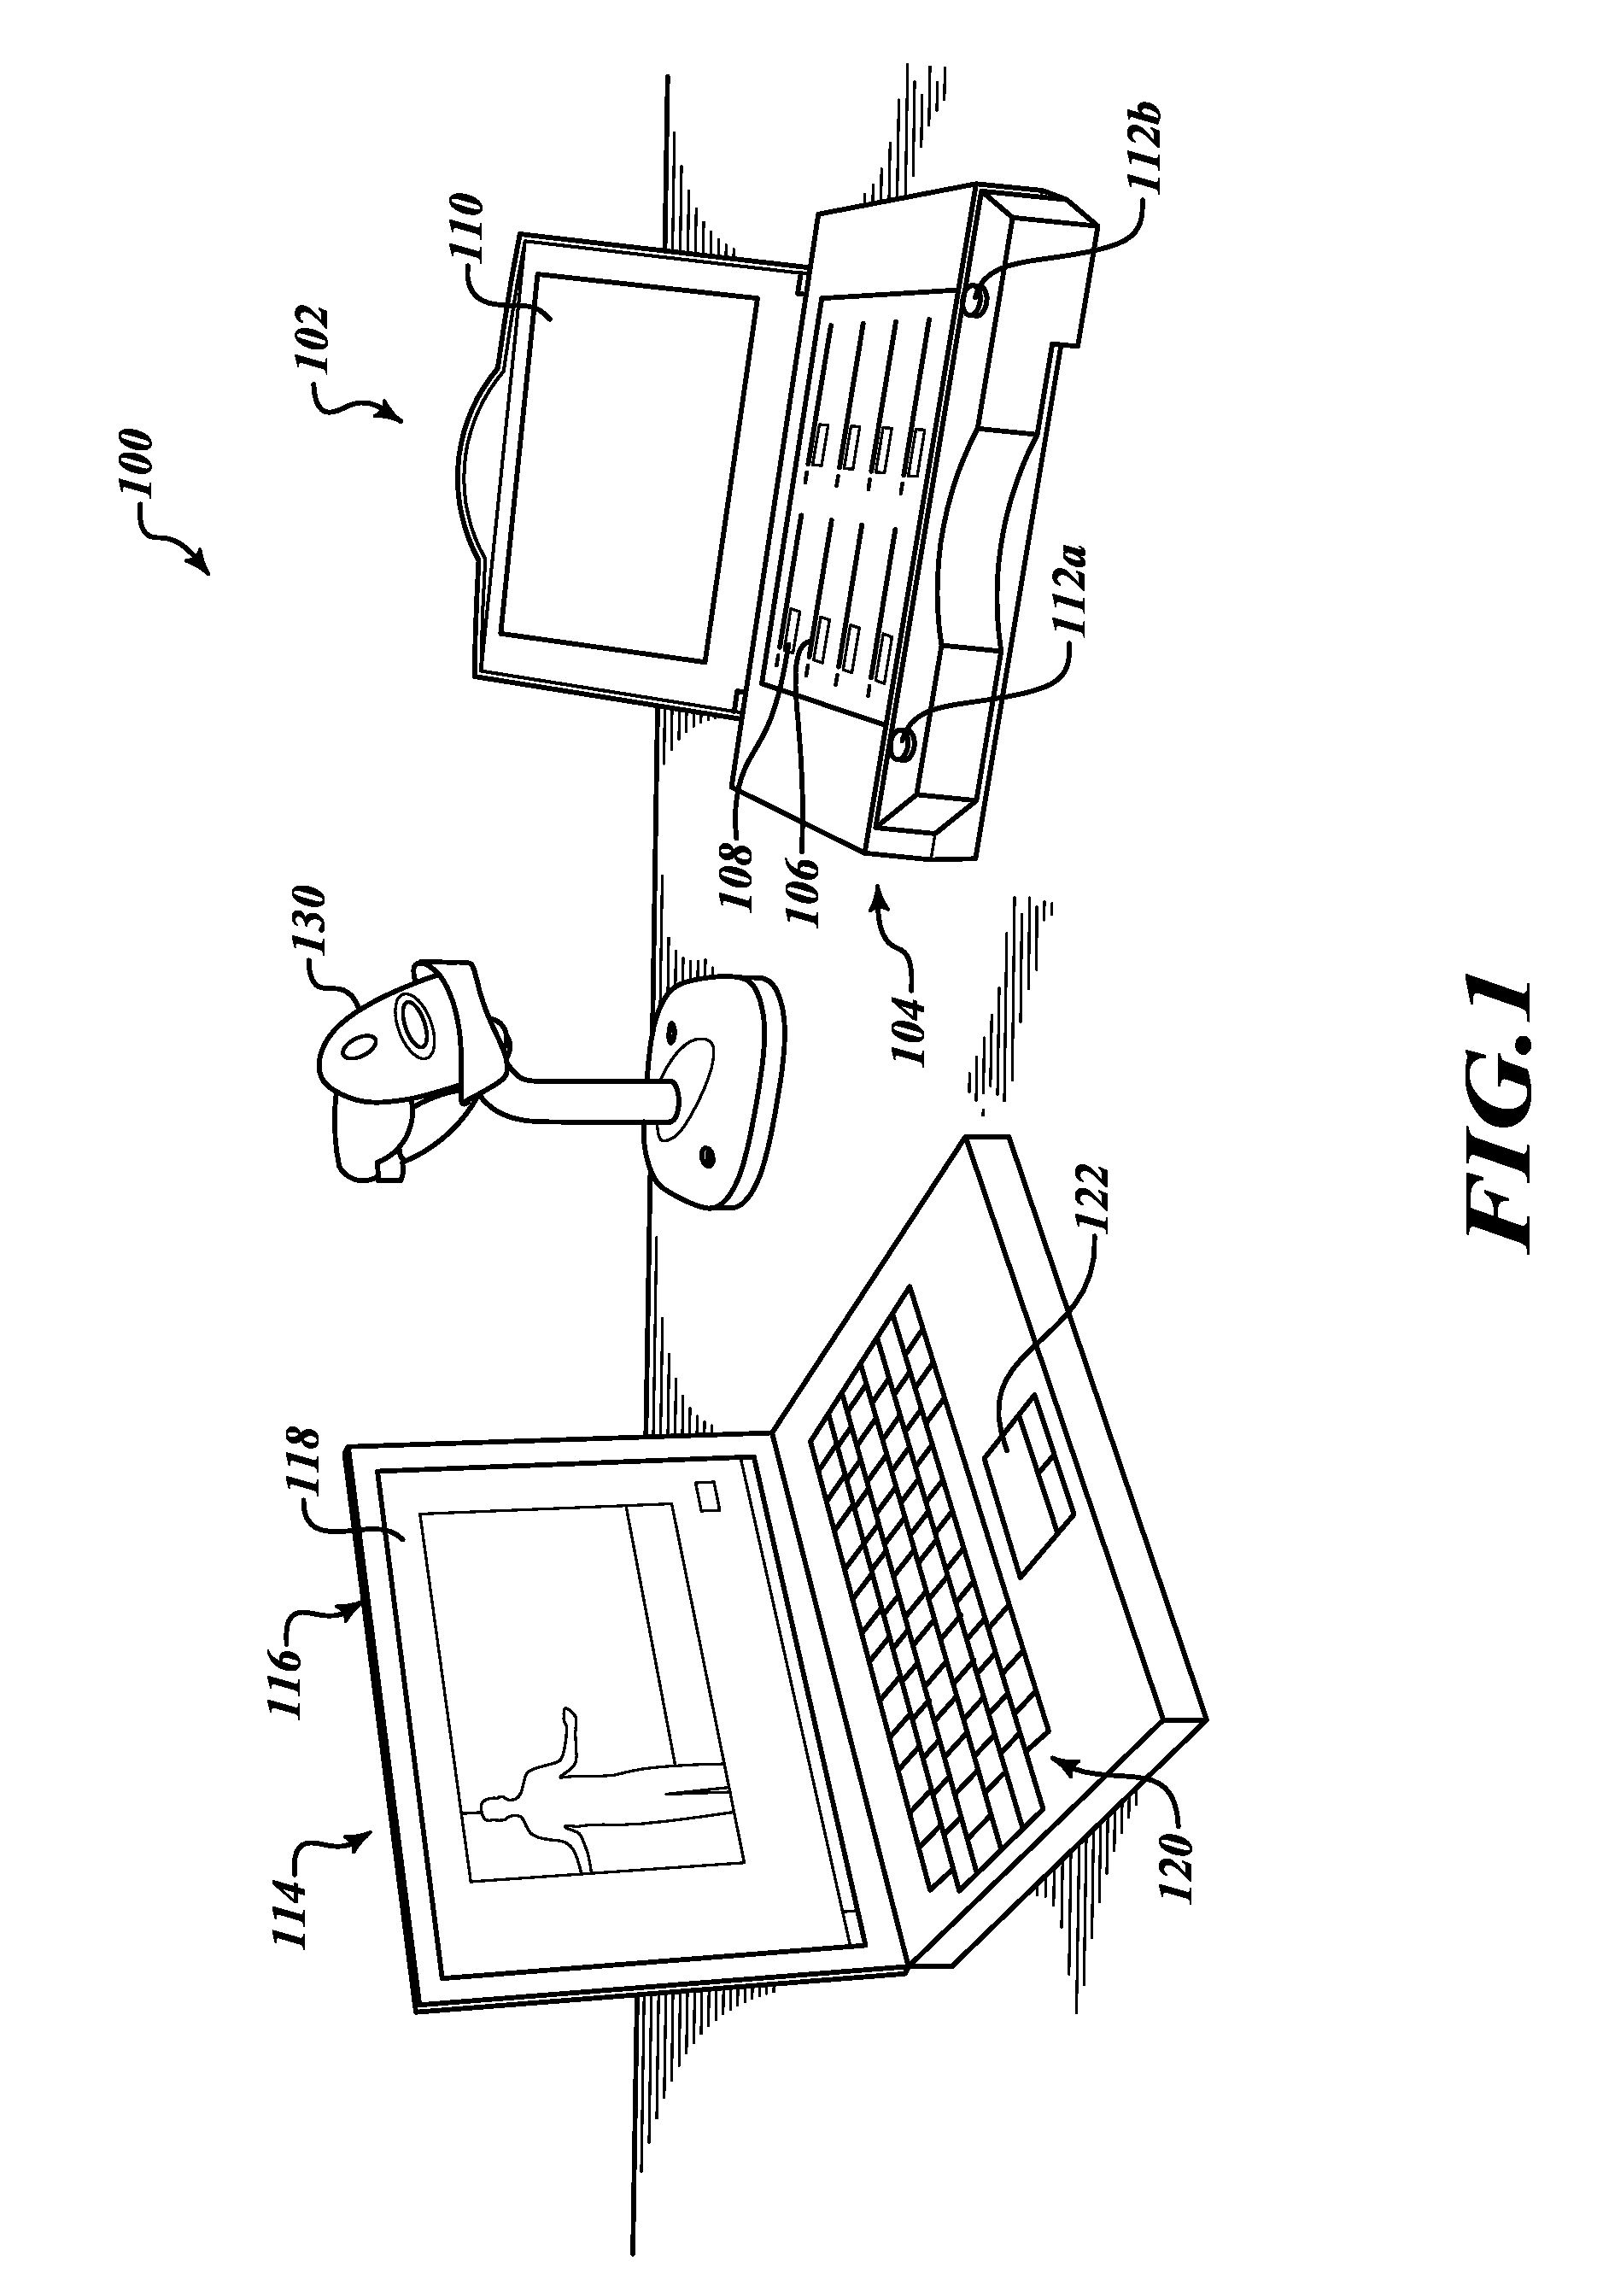 Apparatus, method and article to perform assays using assay strips